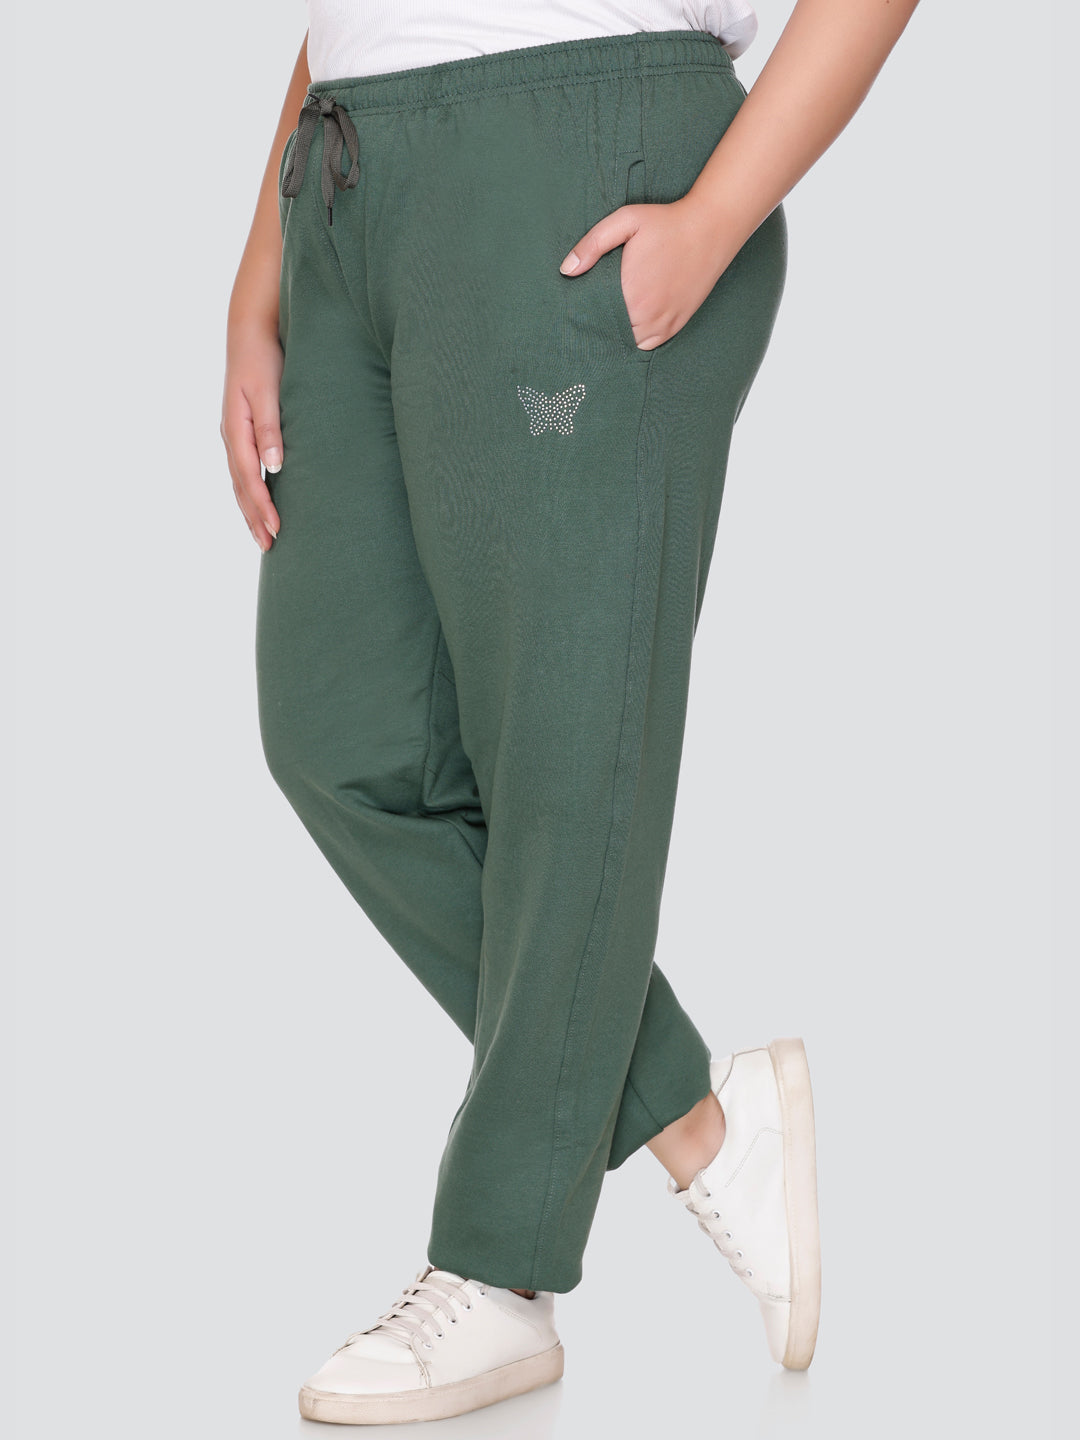 Winter Track Pants - Buy Winter Track Pants online in India